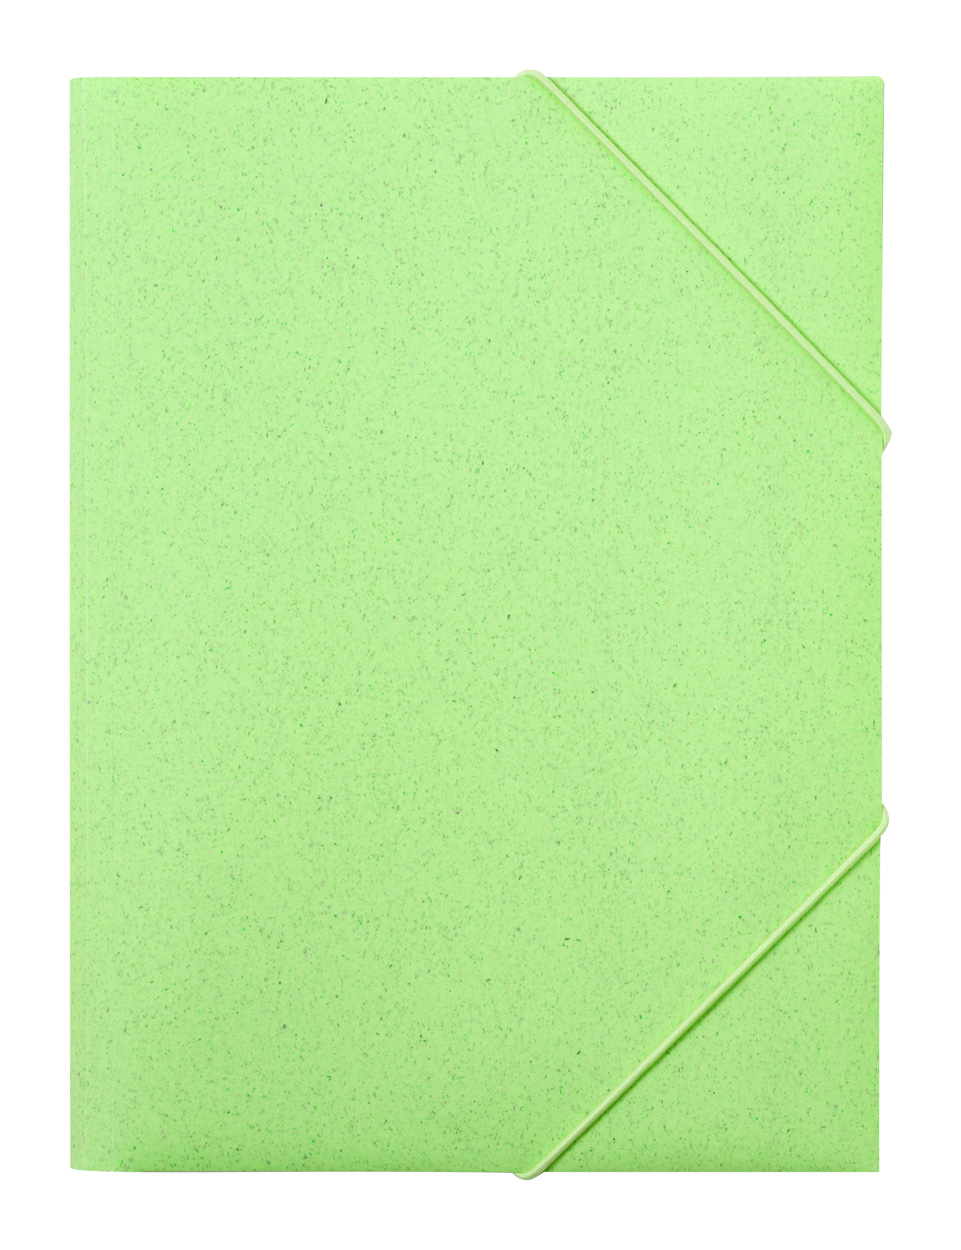 Quixar style for documents - green